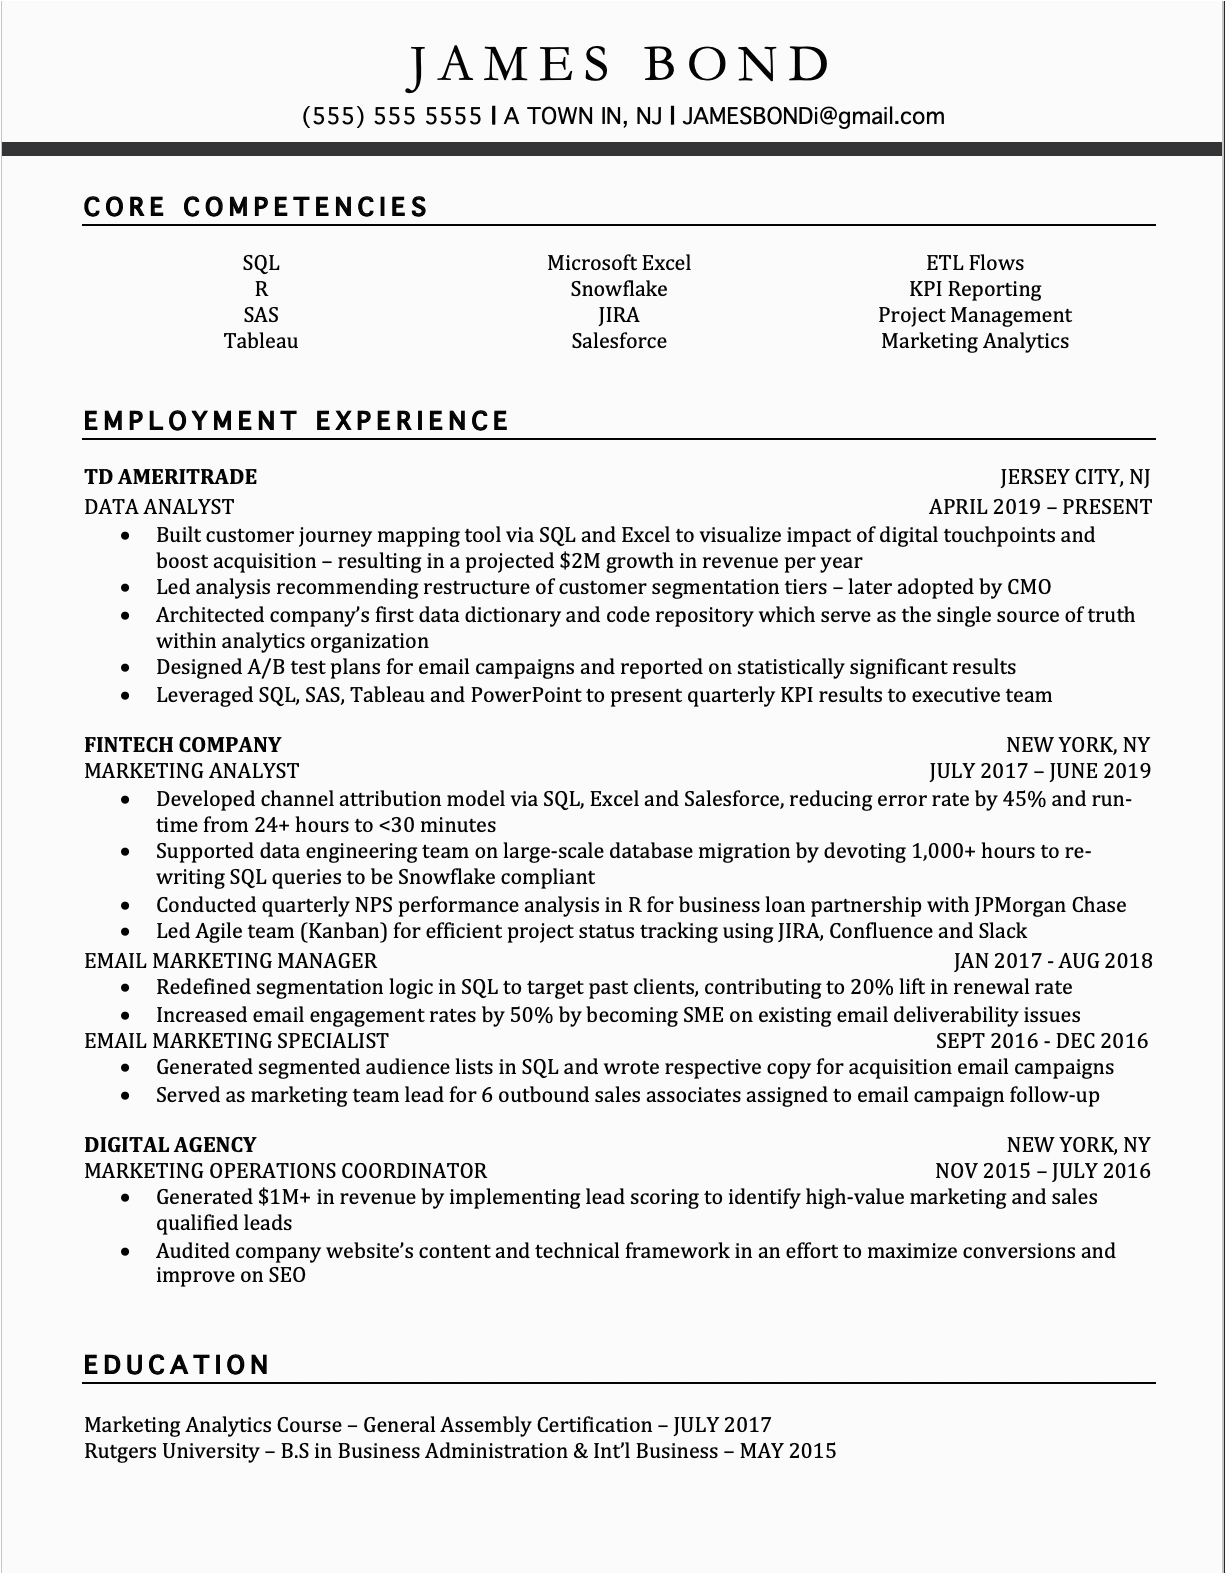 Sample Resume Different Positions Same Company Resume format Multiple Positions In Same Pany